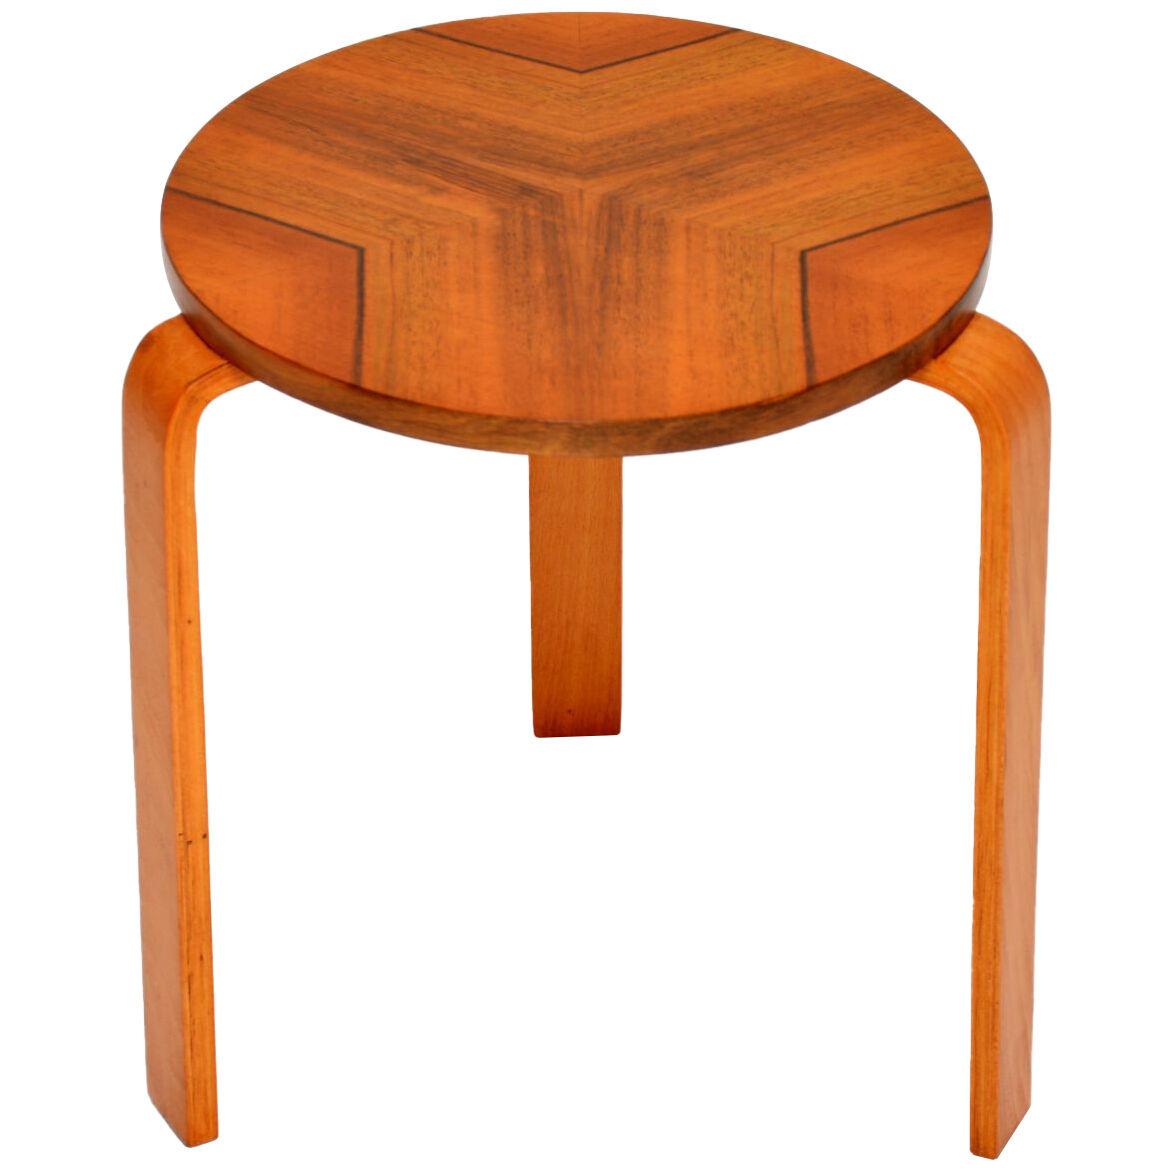 1950's Walnut Bentwood Stool / Side Table